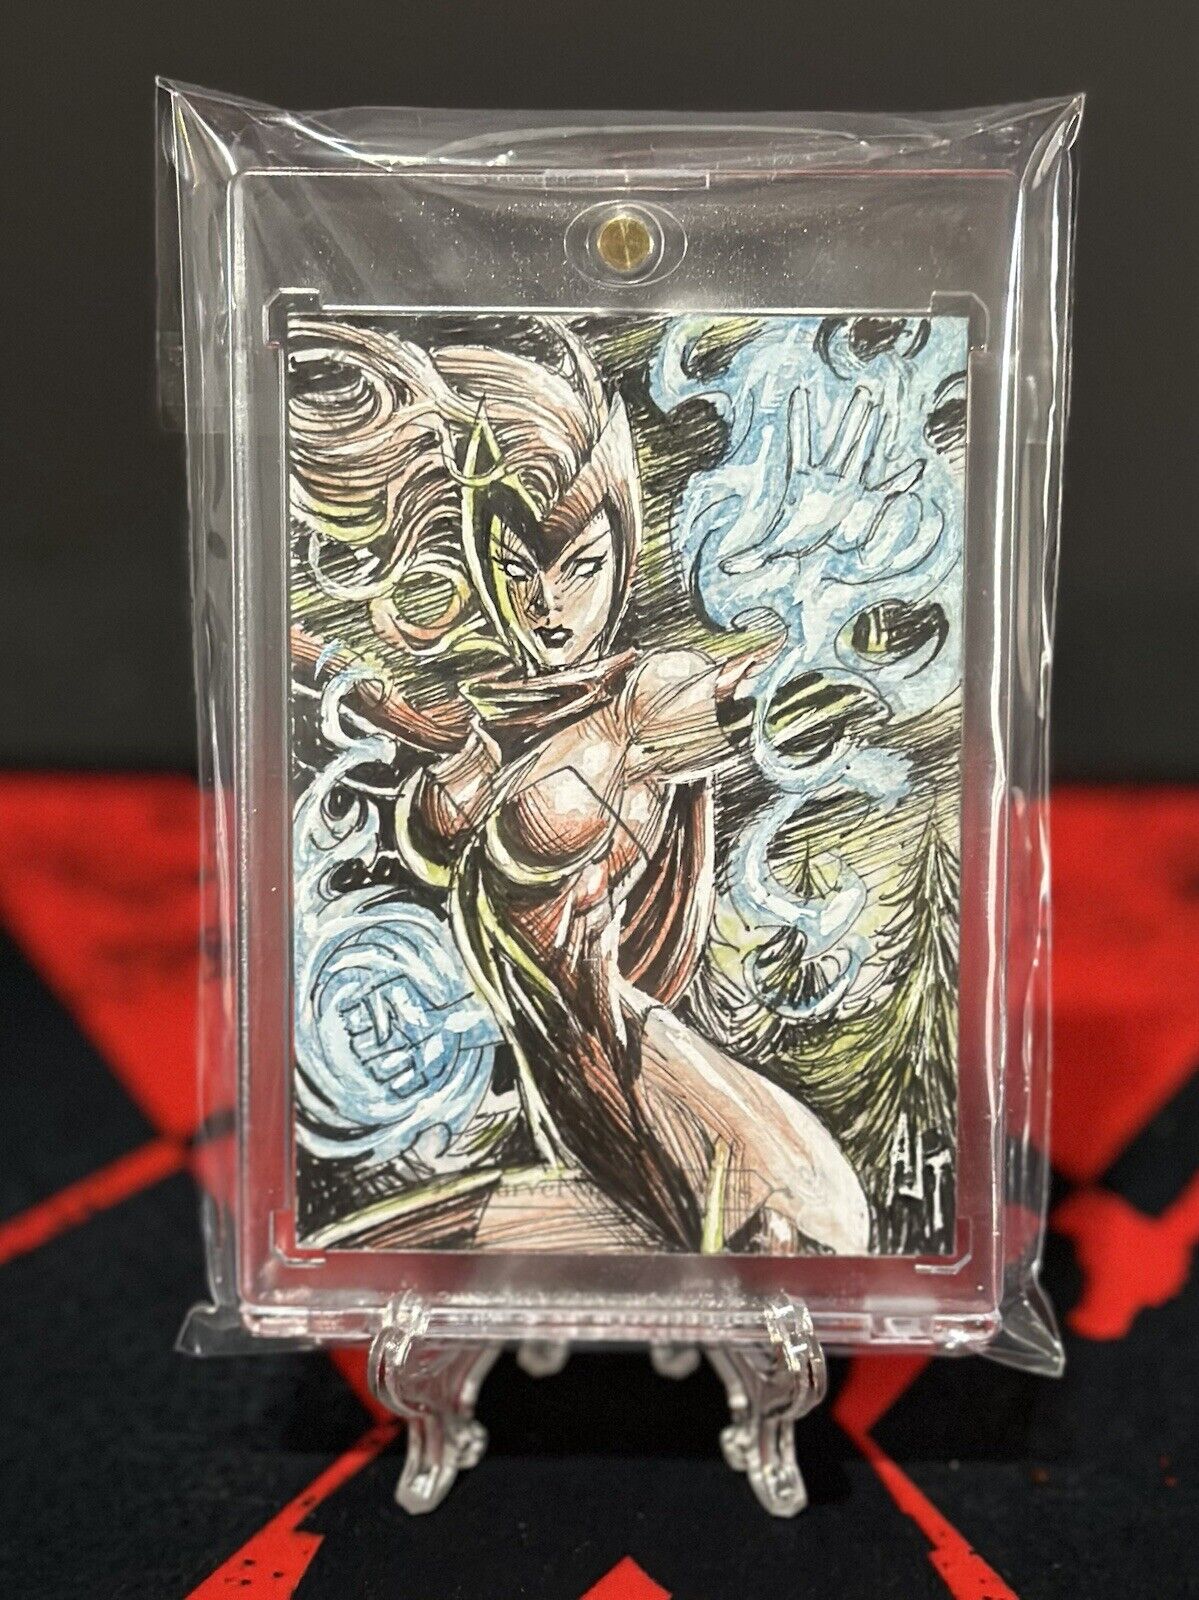 2018 Upper Deck Marvel Masterpieces Sketch Card Scarlet Witch by Anthony Tan 1/1